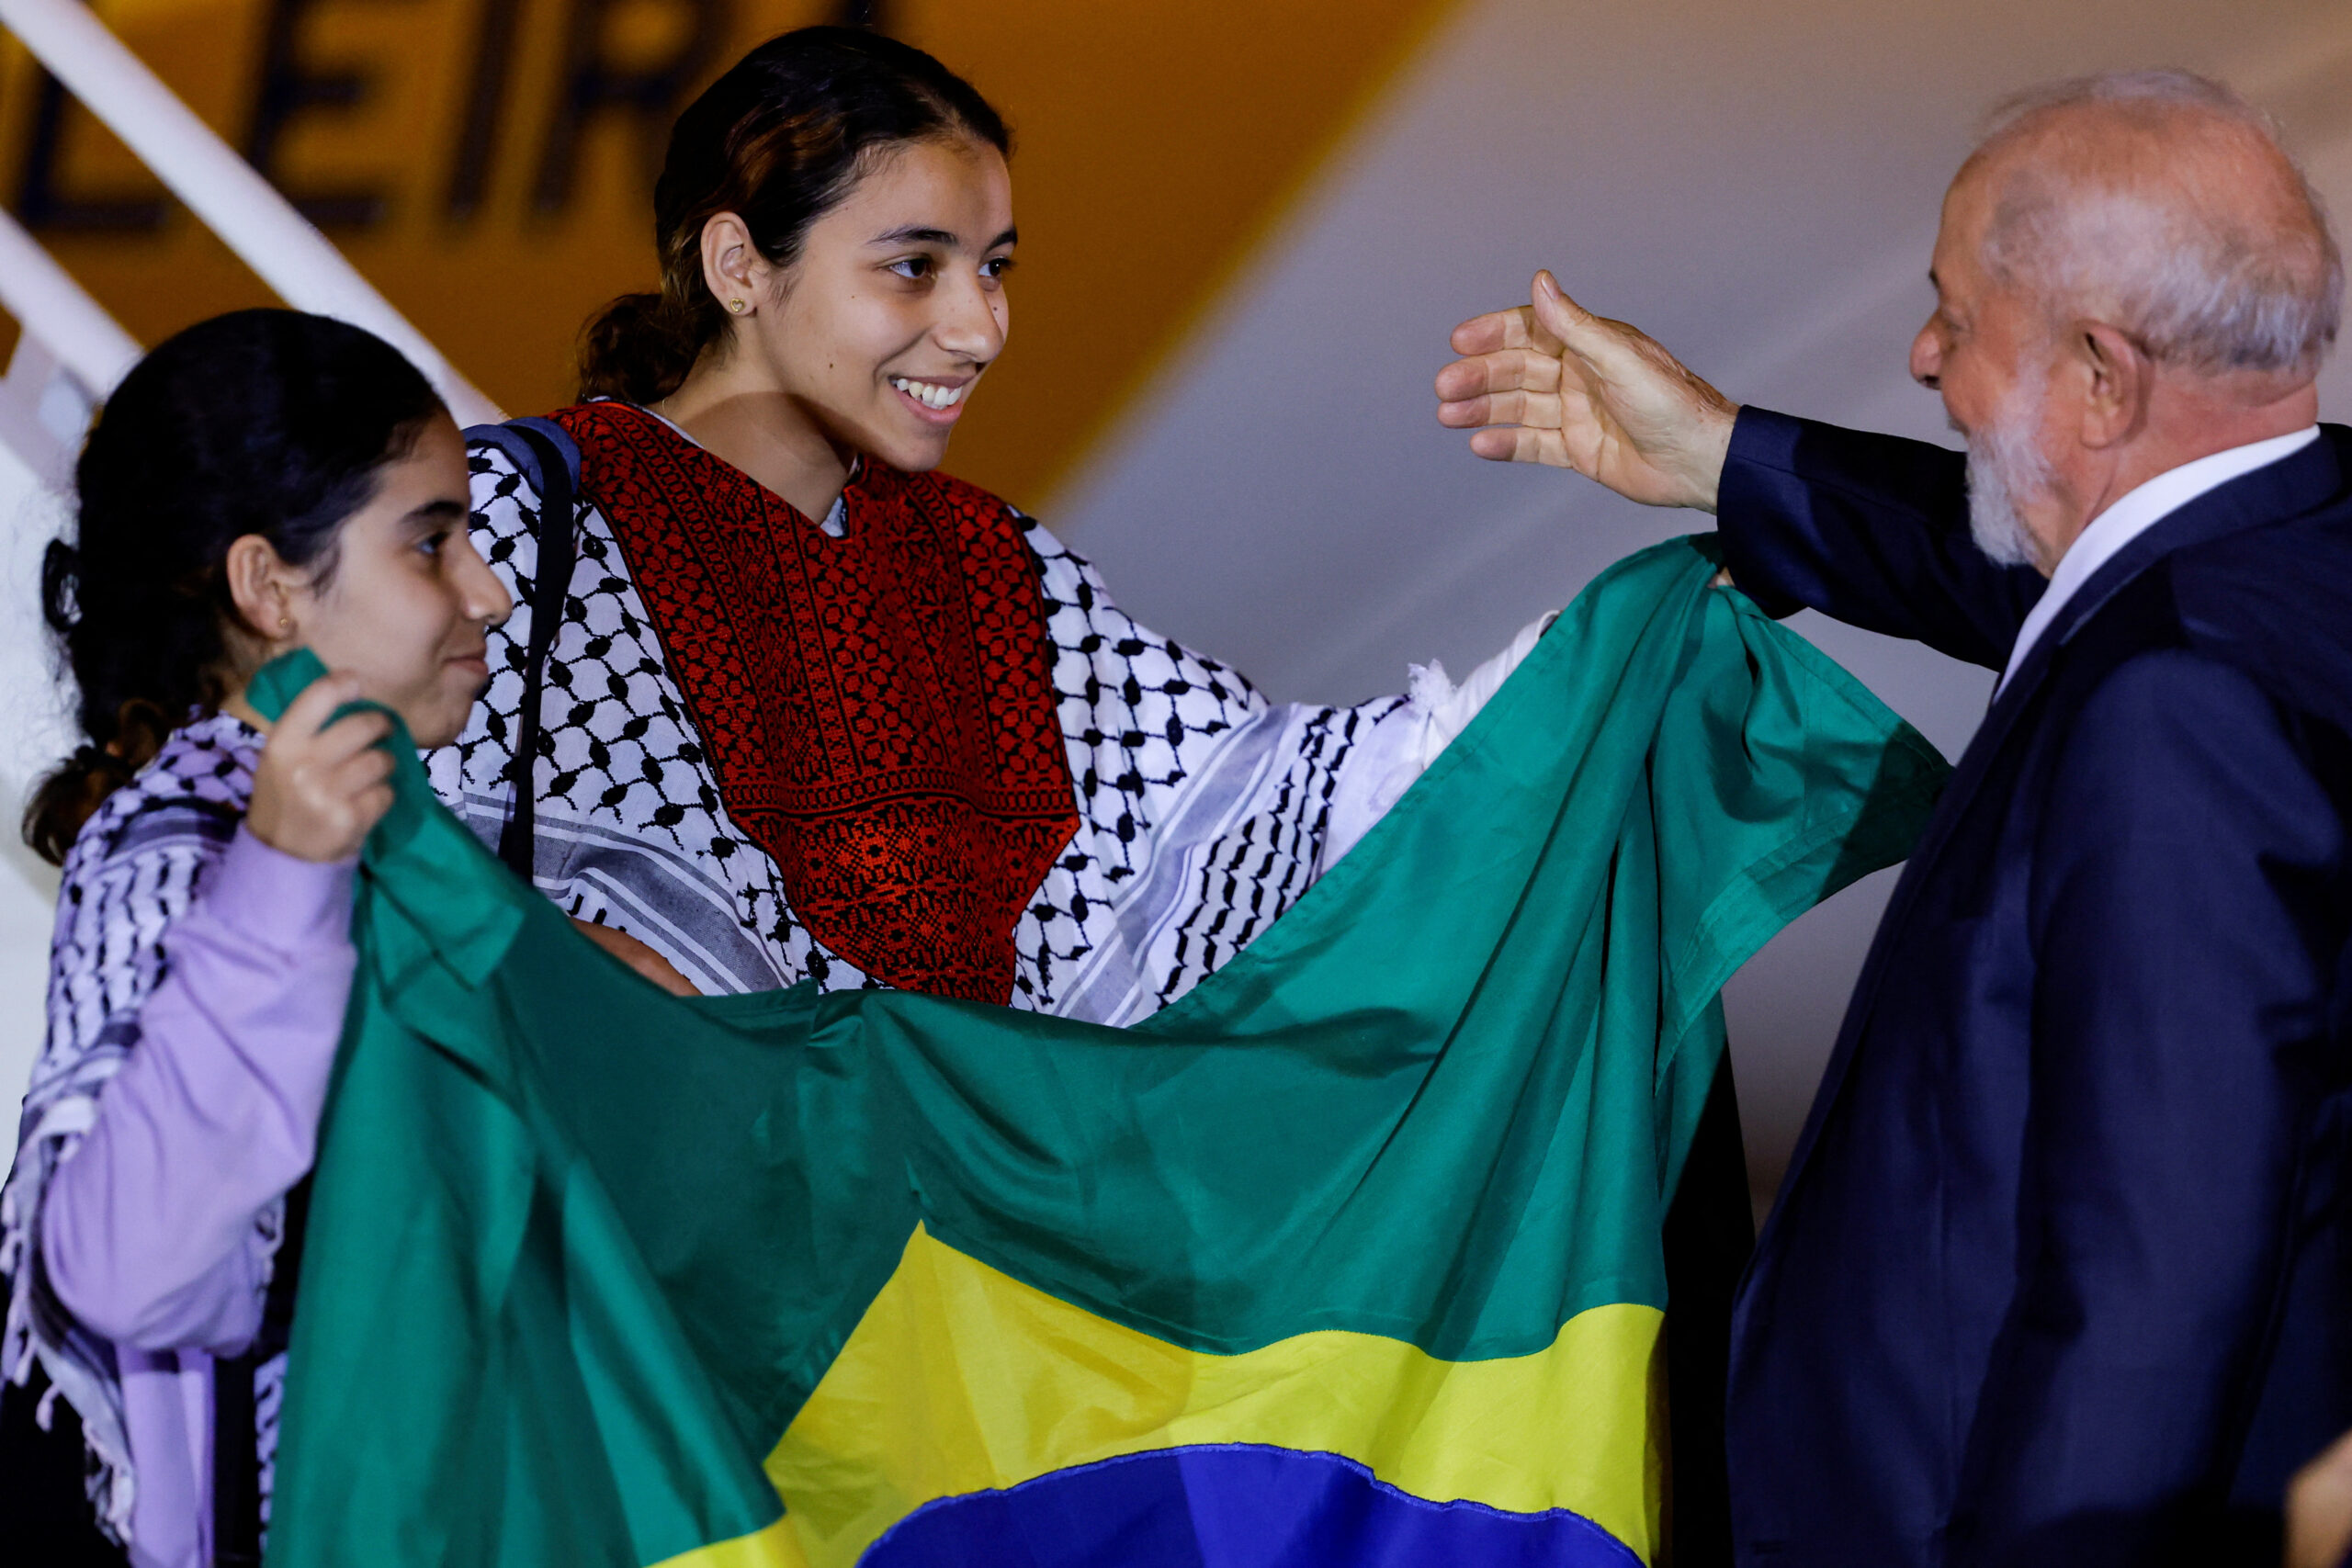 Brazil's Lula welcomes citizens rescued from Gaza, condemns 'inhumane violence'